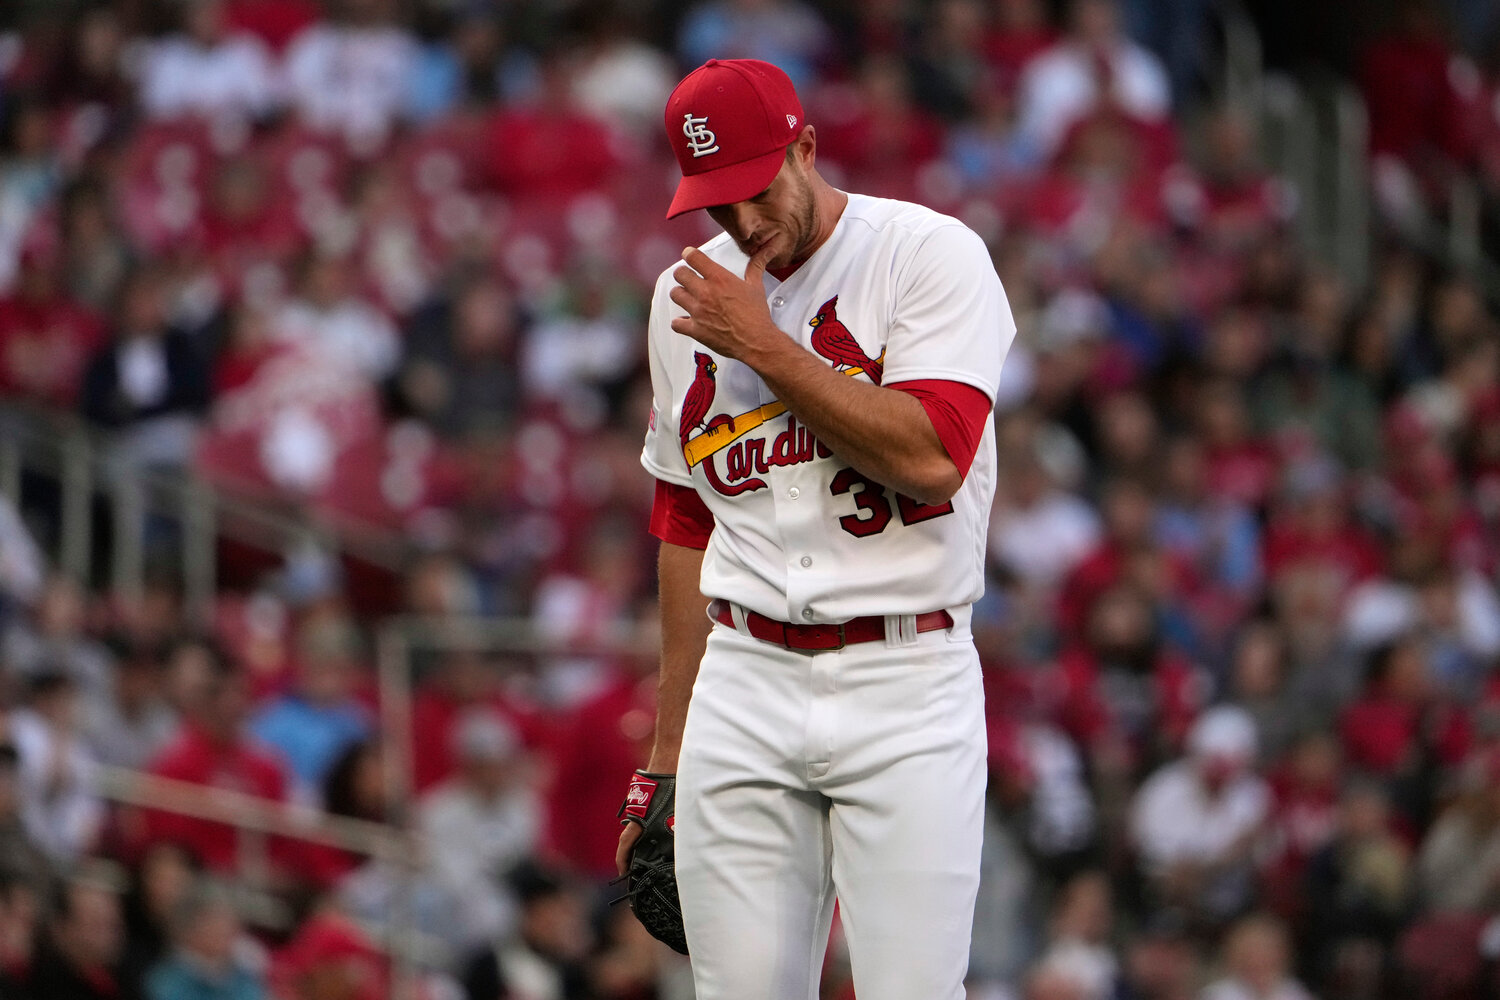 St. Louis Cardinals starting pitcher Steven Matz walks off the field after working the first inning of a baseball game against the Los Angeles Angels Tuesday, May 2, 2023, in St. Louis. (AP Photo/Jeff Roberson)